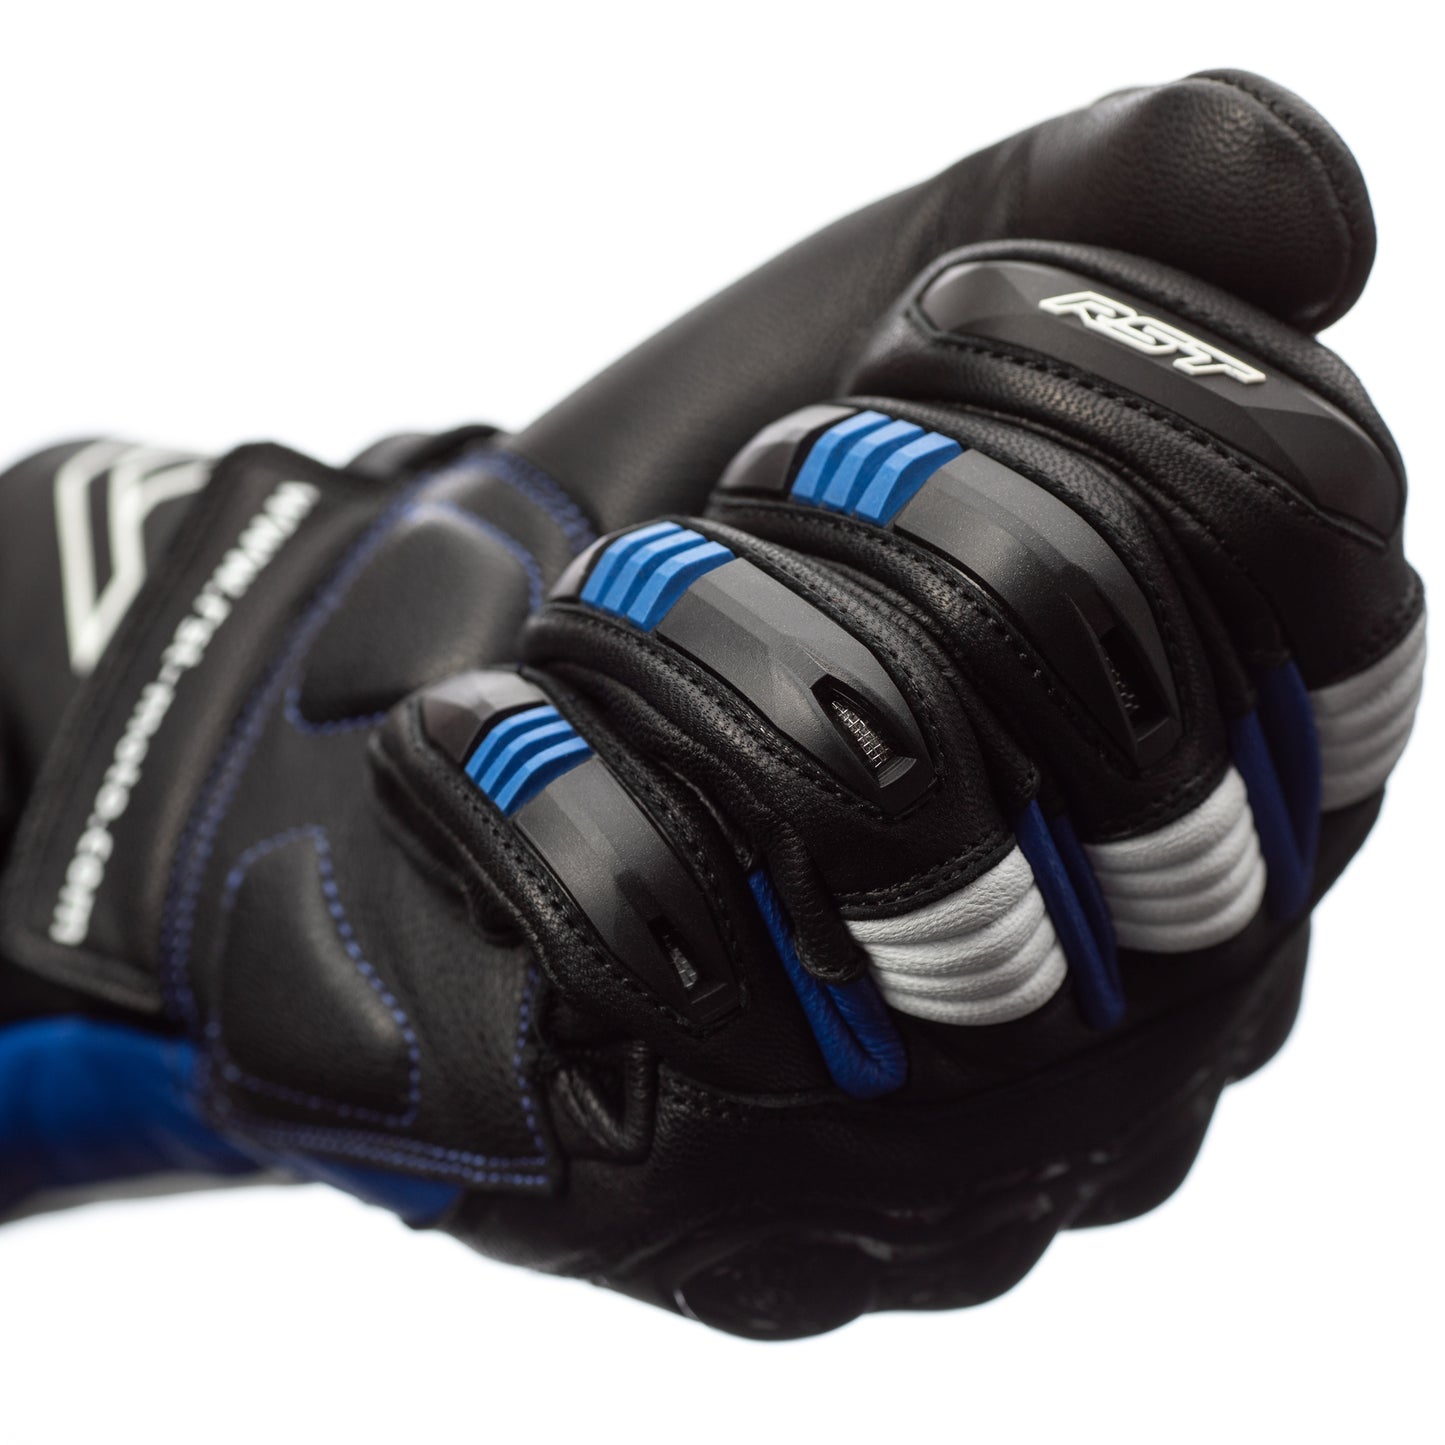 RST Pilot Leather Riding Gloves - CE APPROVED - Black/Blue/White